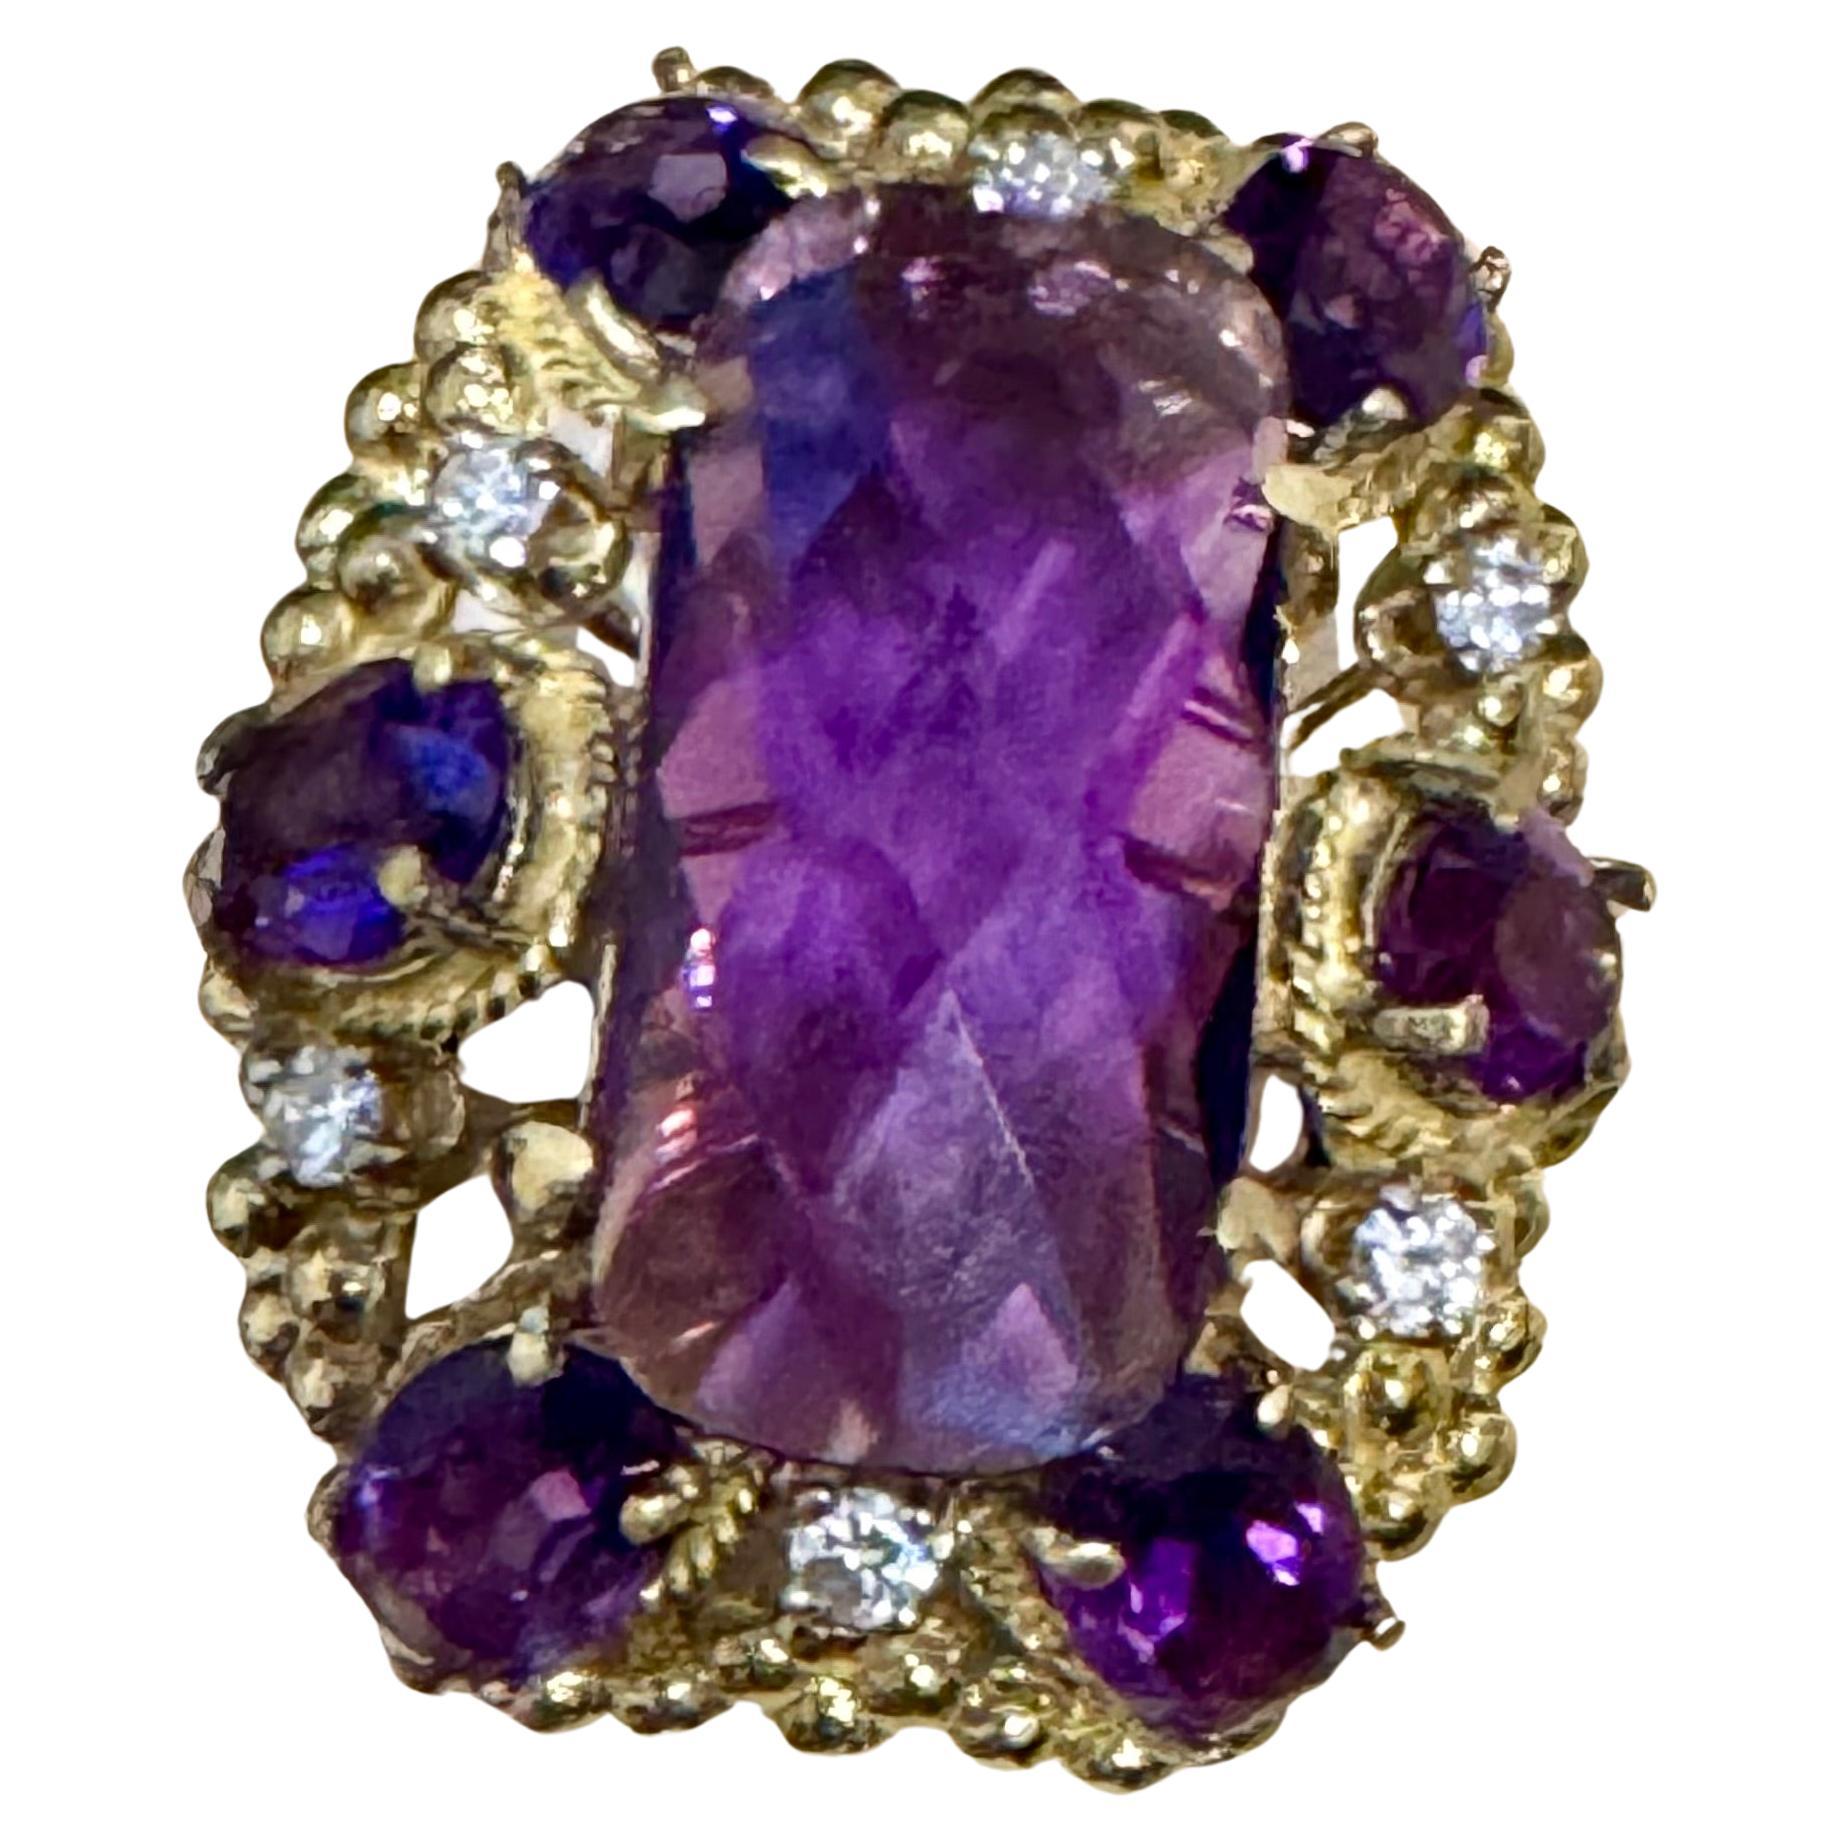 Huge Checker Board Cushion Cut Natural Amethyst Cocktail Ring 14KYG, 19.2gm
 Introducing our exquisite vintage cocktail ring, a true masterpiece of jewelry. This stunning piece is a massive Ring featuring approximately  10 carat checkerboard